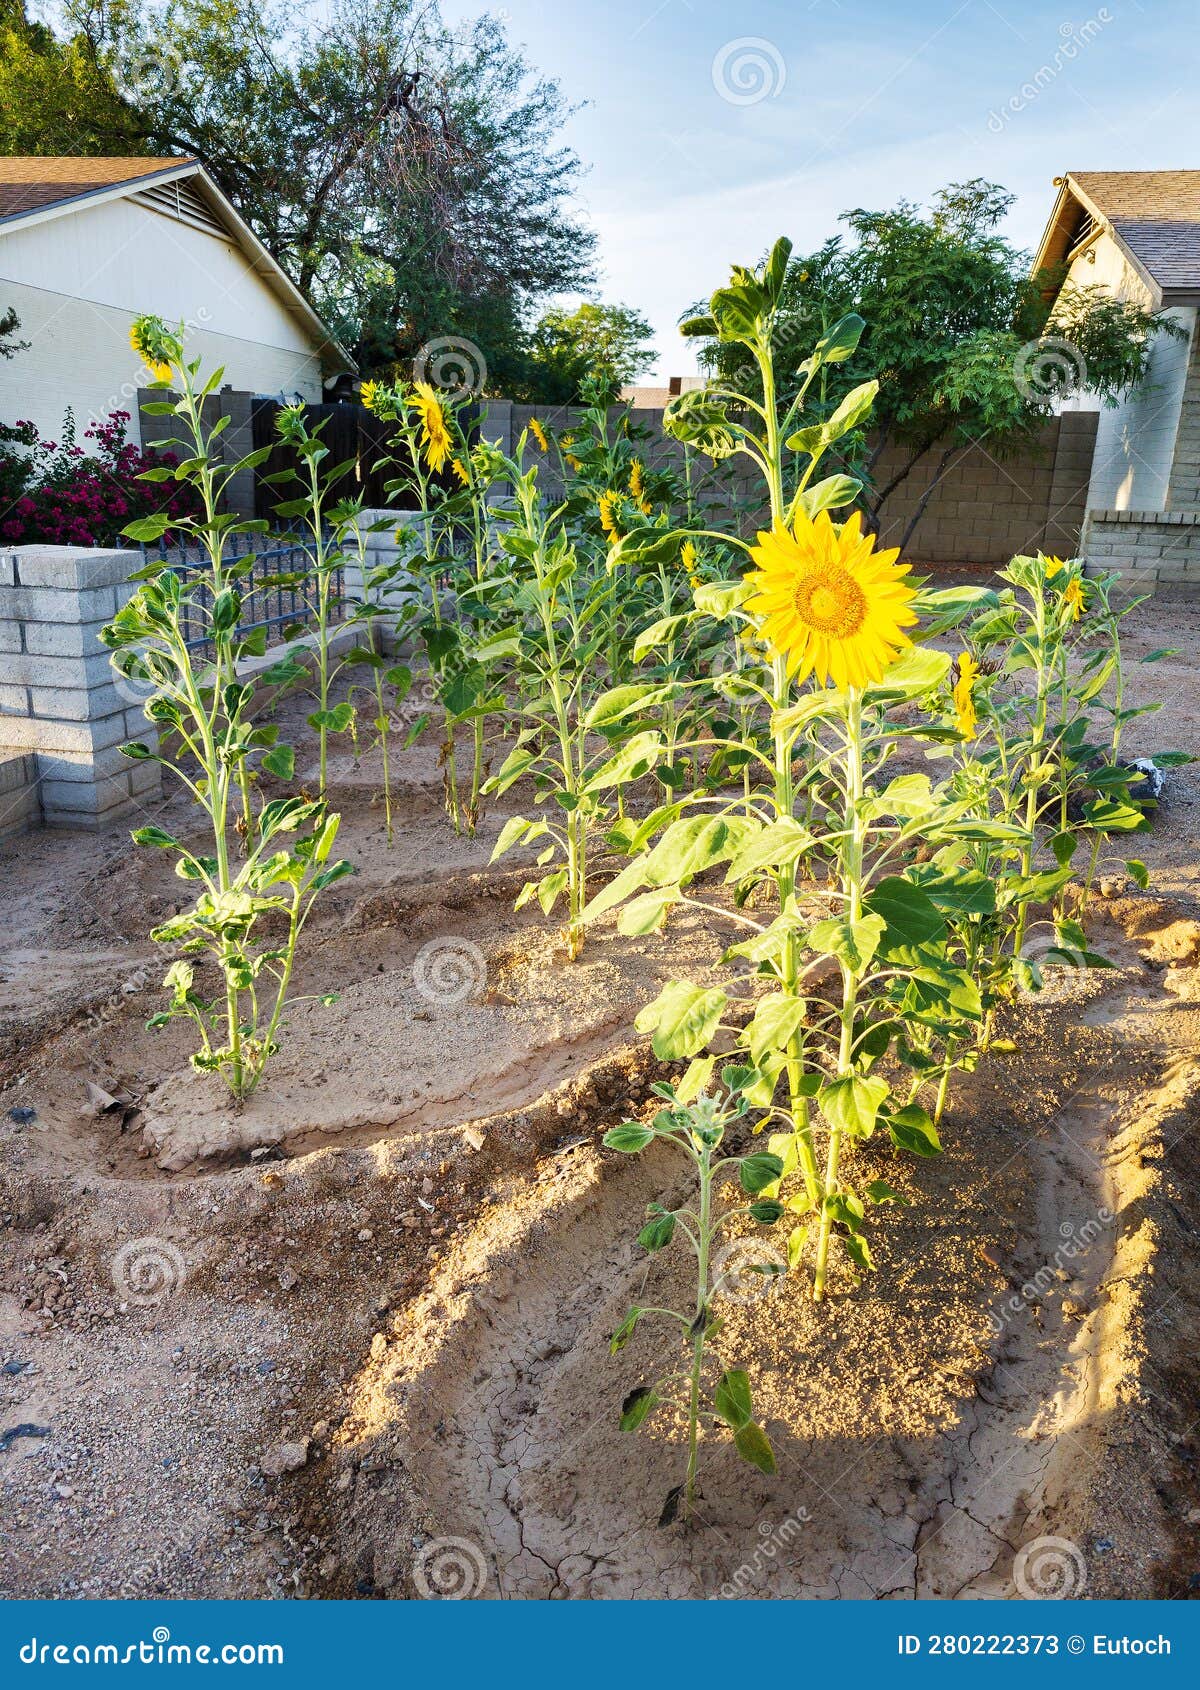 Sunflowers Facing Morning Sun Stock Image - Image of color, colors ...